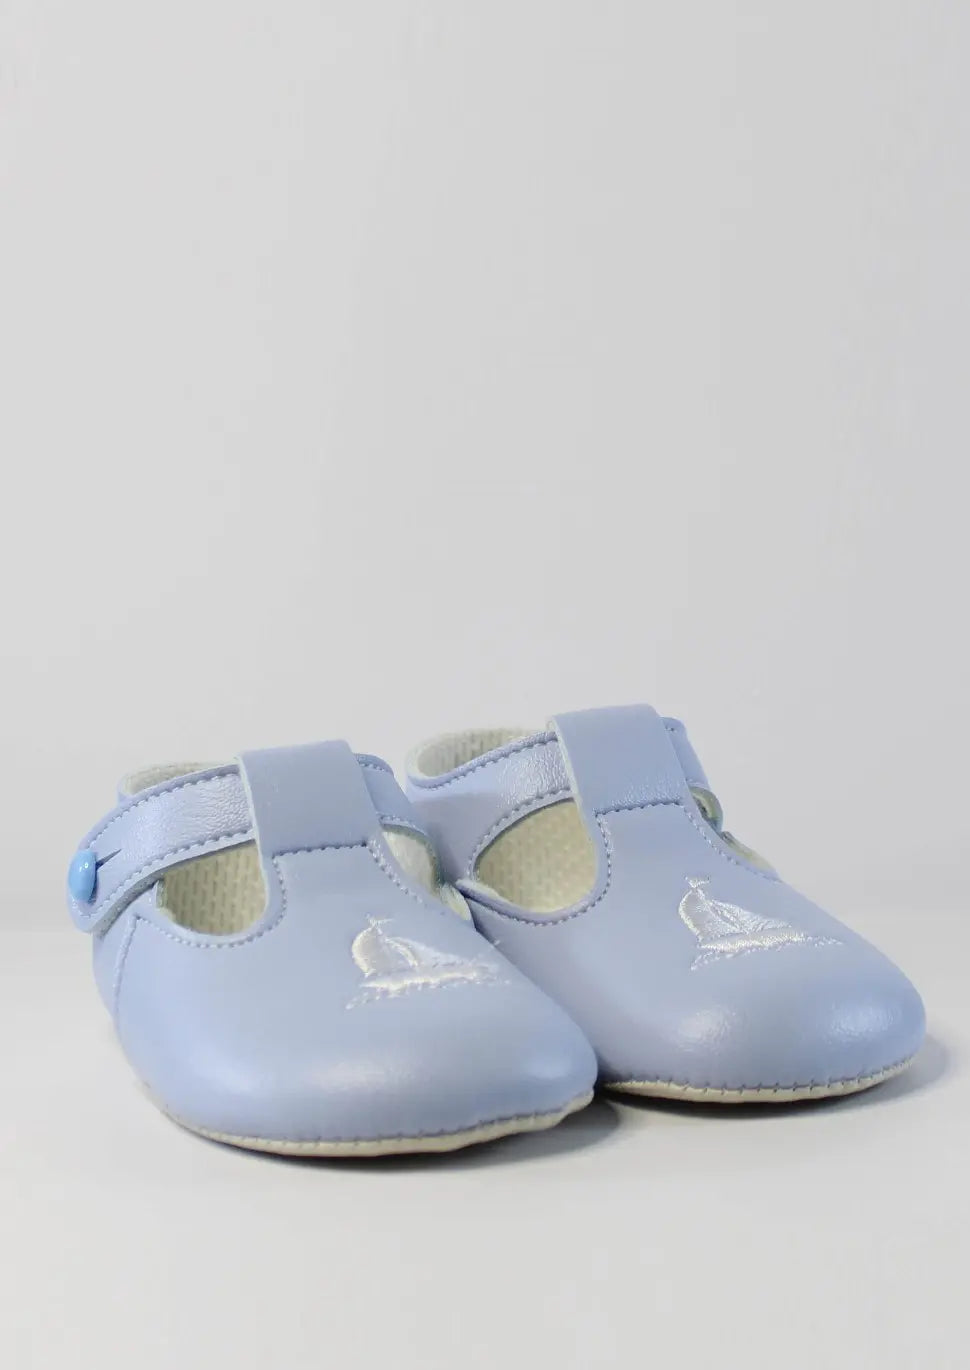 Sky baypods Yacht Motif Shoes from tors childrens wear